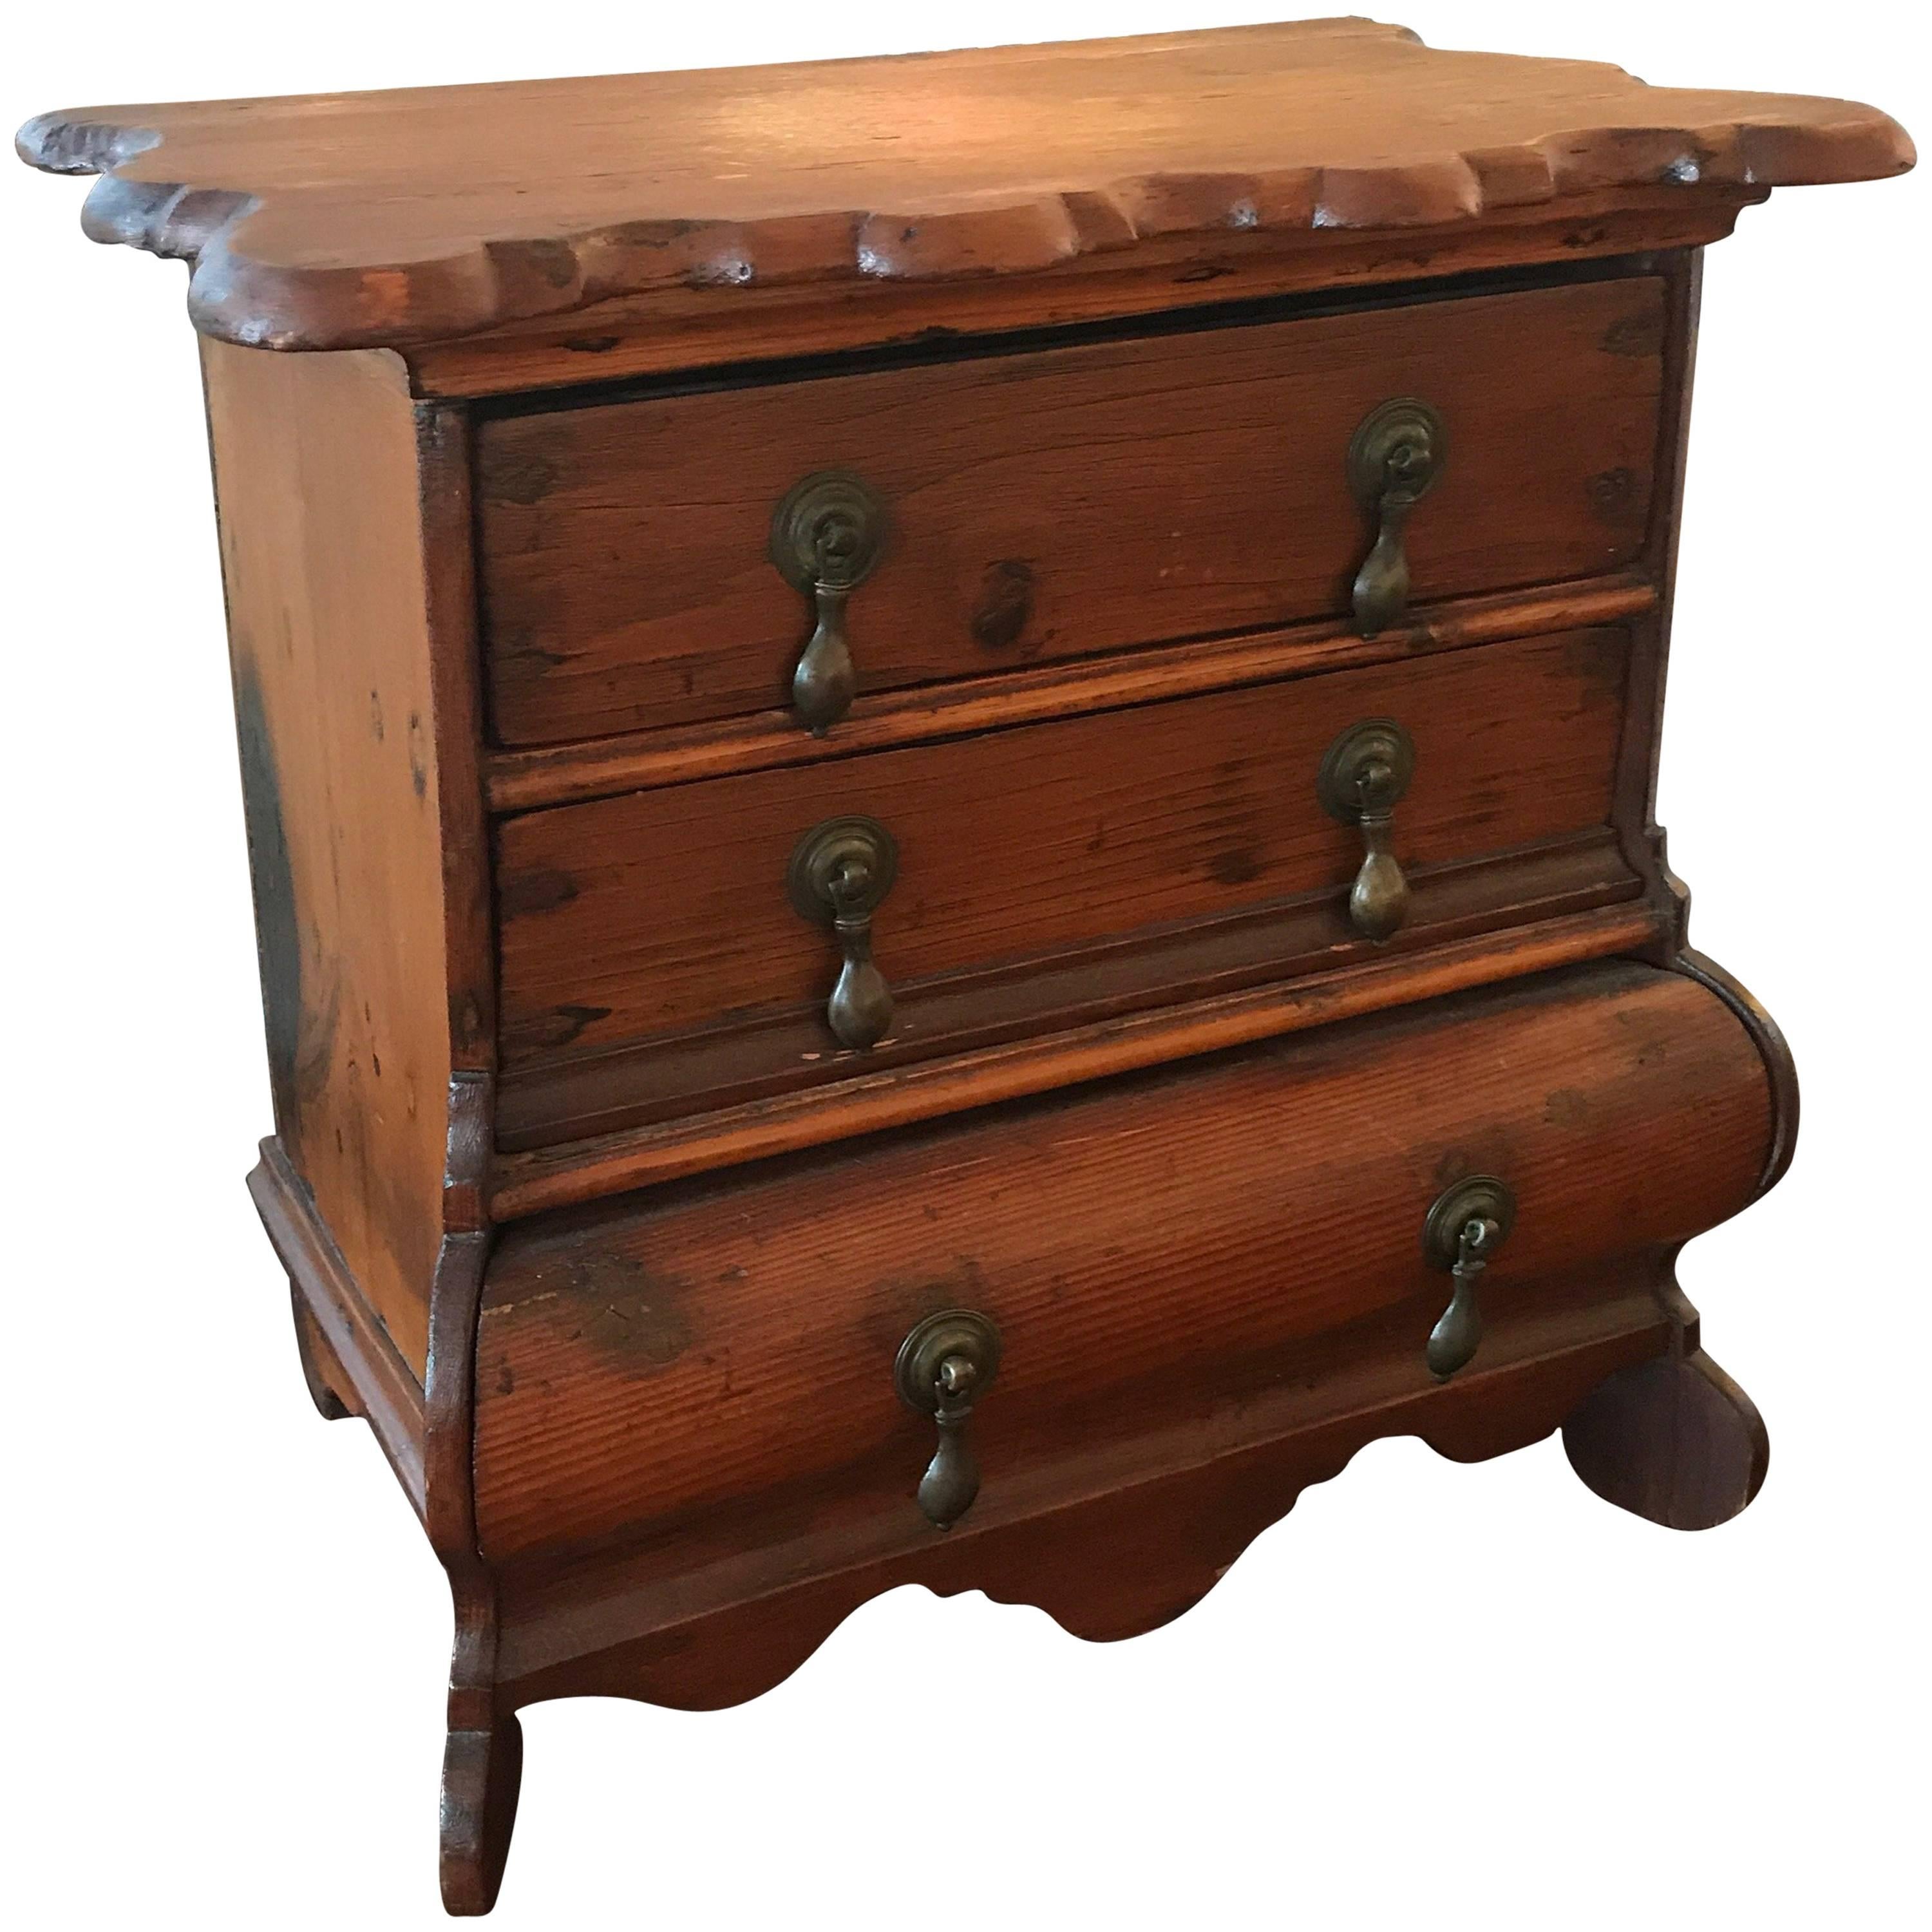 Early 19th Century Dutch Miniature Chest of Drawers